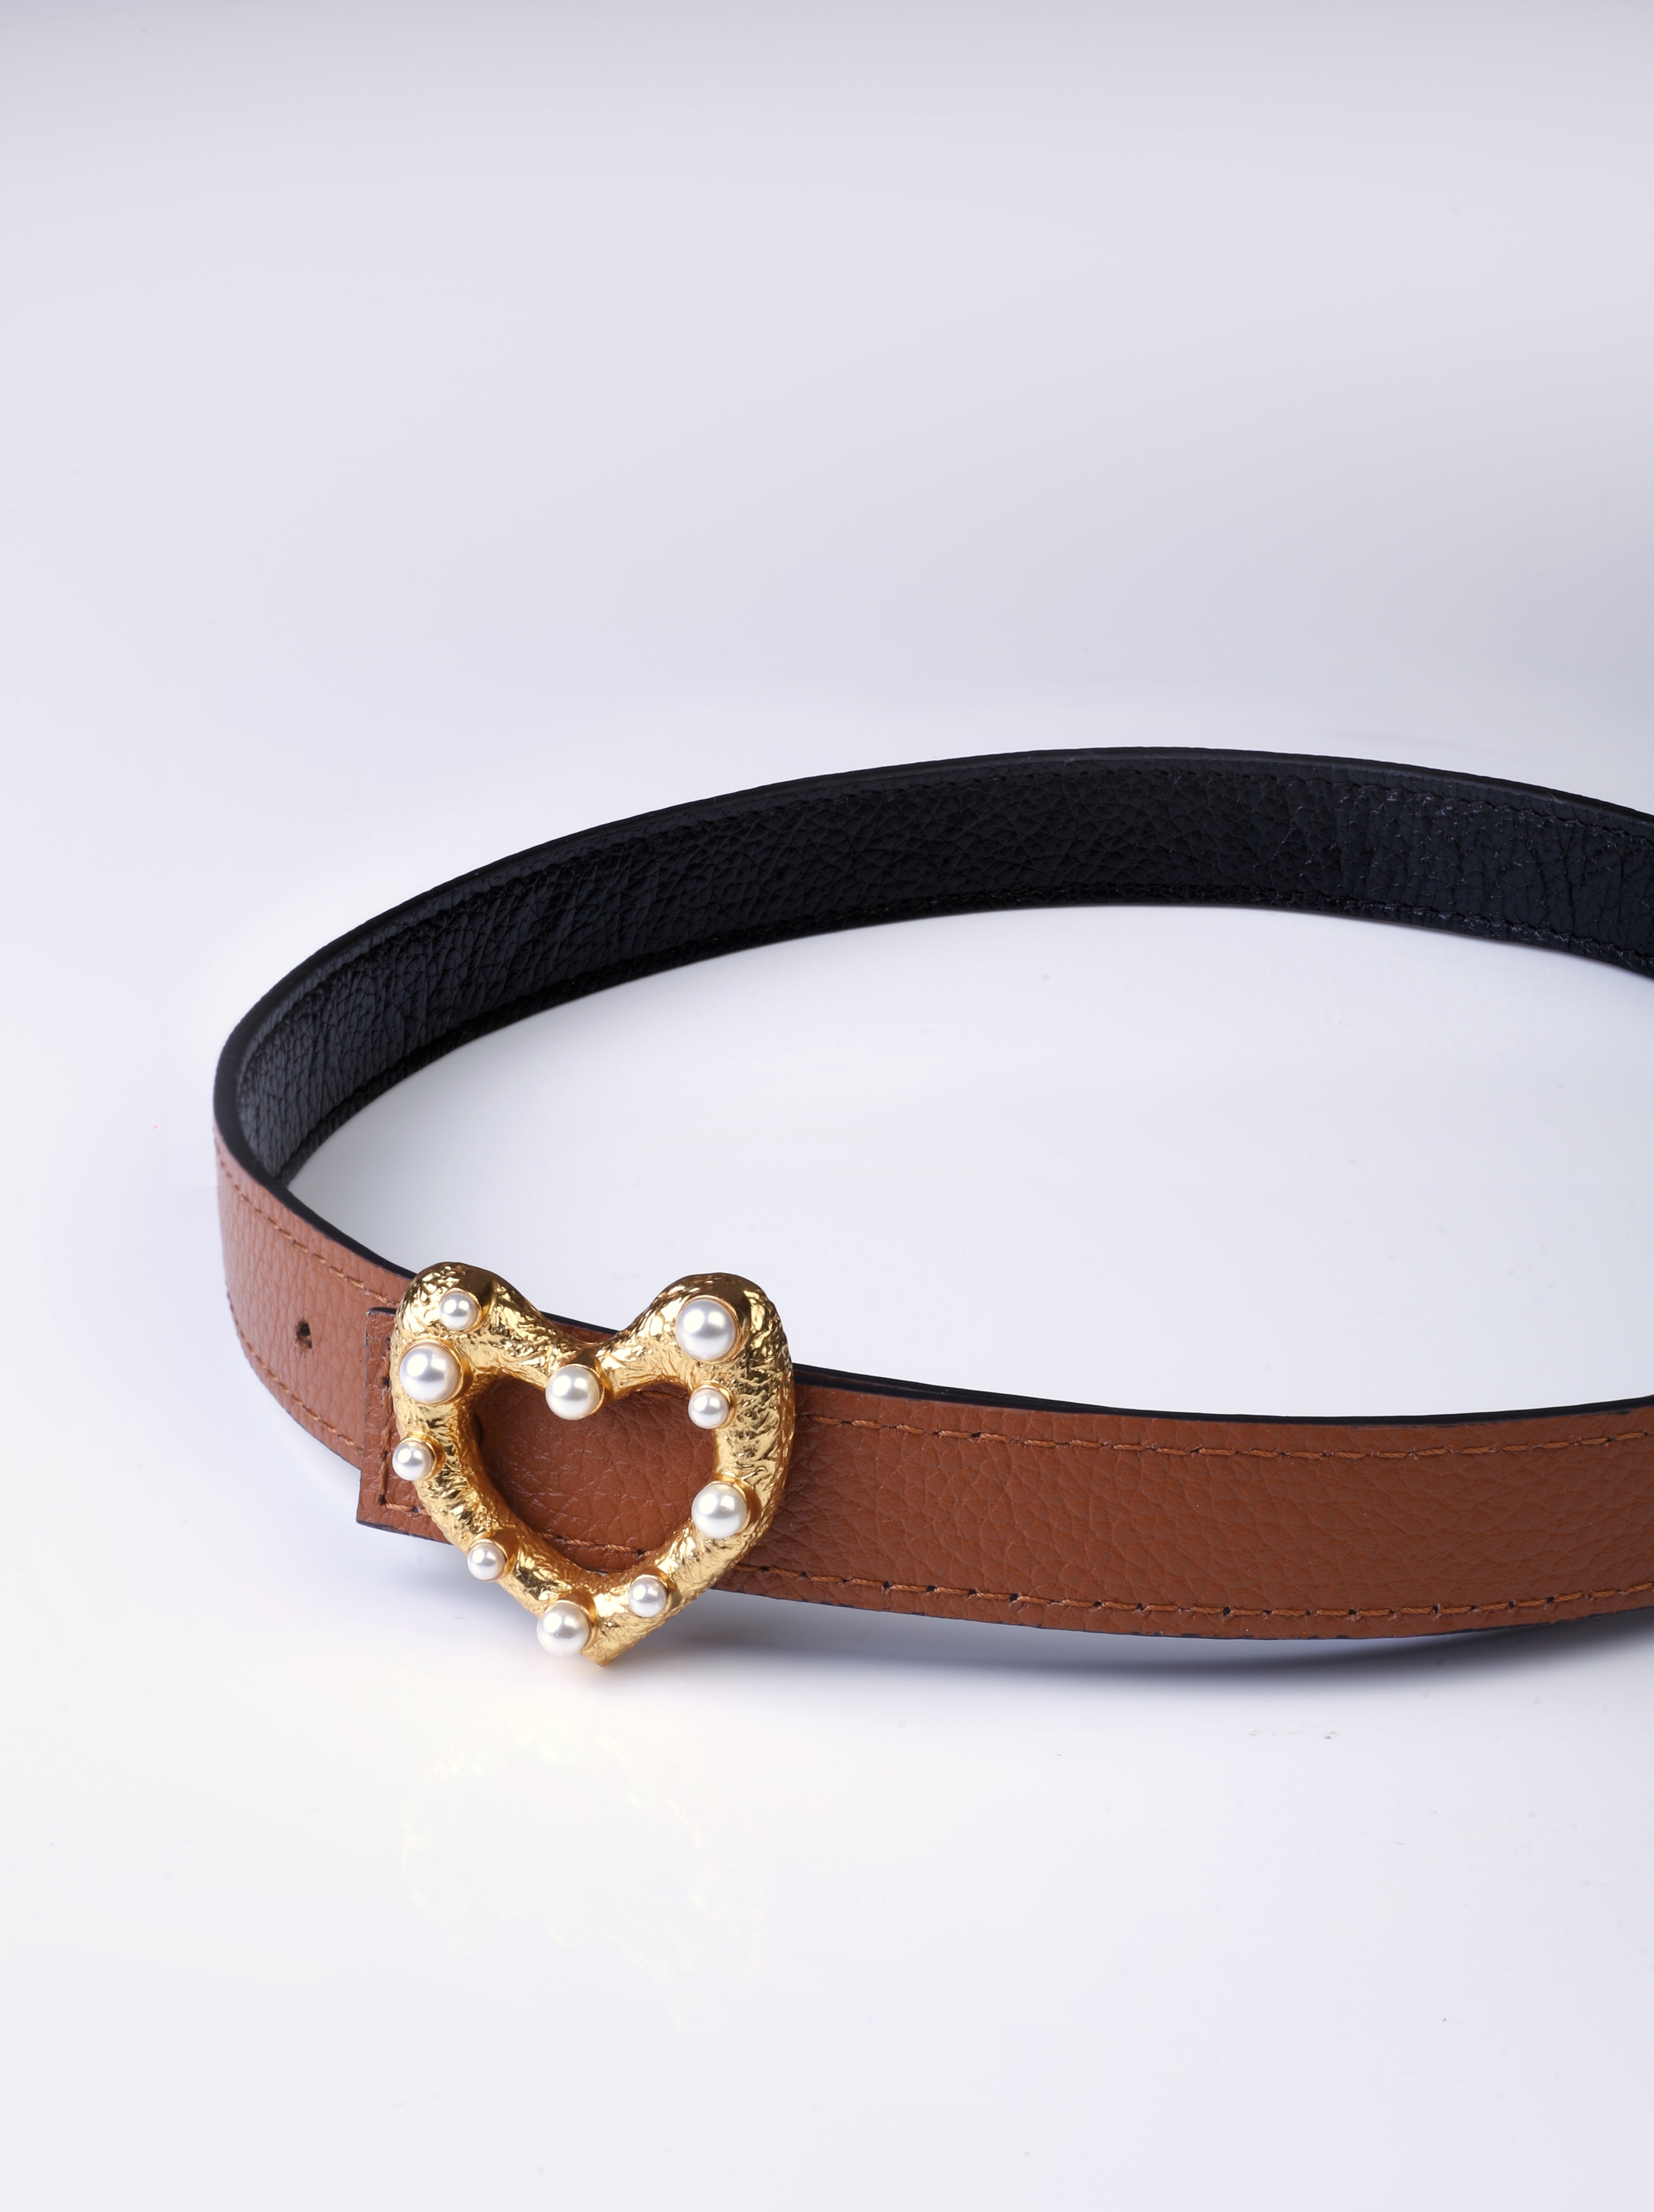 Amama,Reversible Thin Belt With Gold Heart Buckle